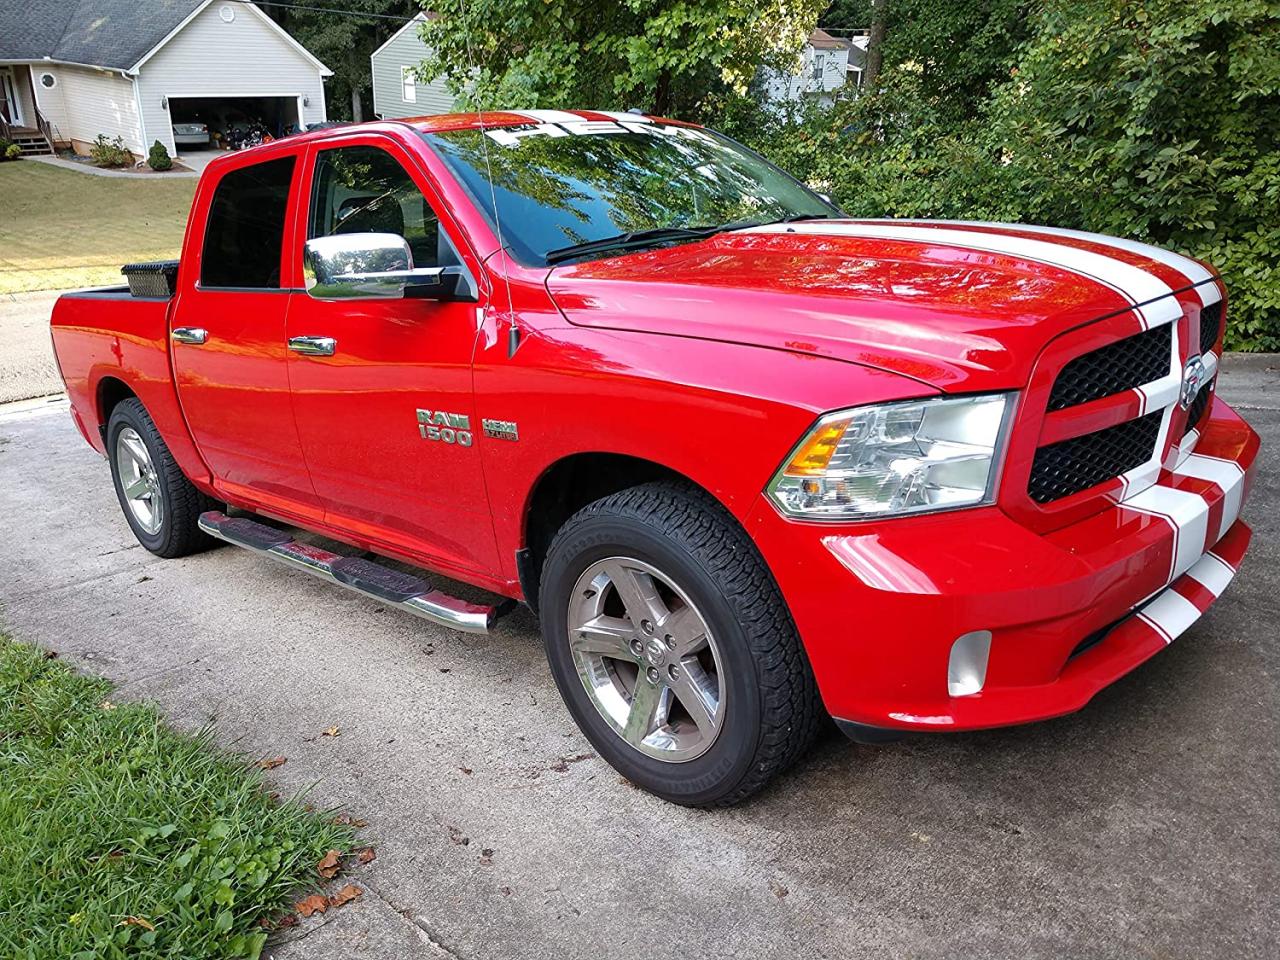 Mifeier 5 Curved Nerf Bars Side Steps Running Boards Fit 09-17 Dodge Ram  1500 Crew Cab With 4 Full Size Doors Exterior Accessories Automotive  plutusias.com